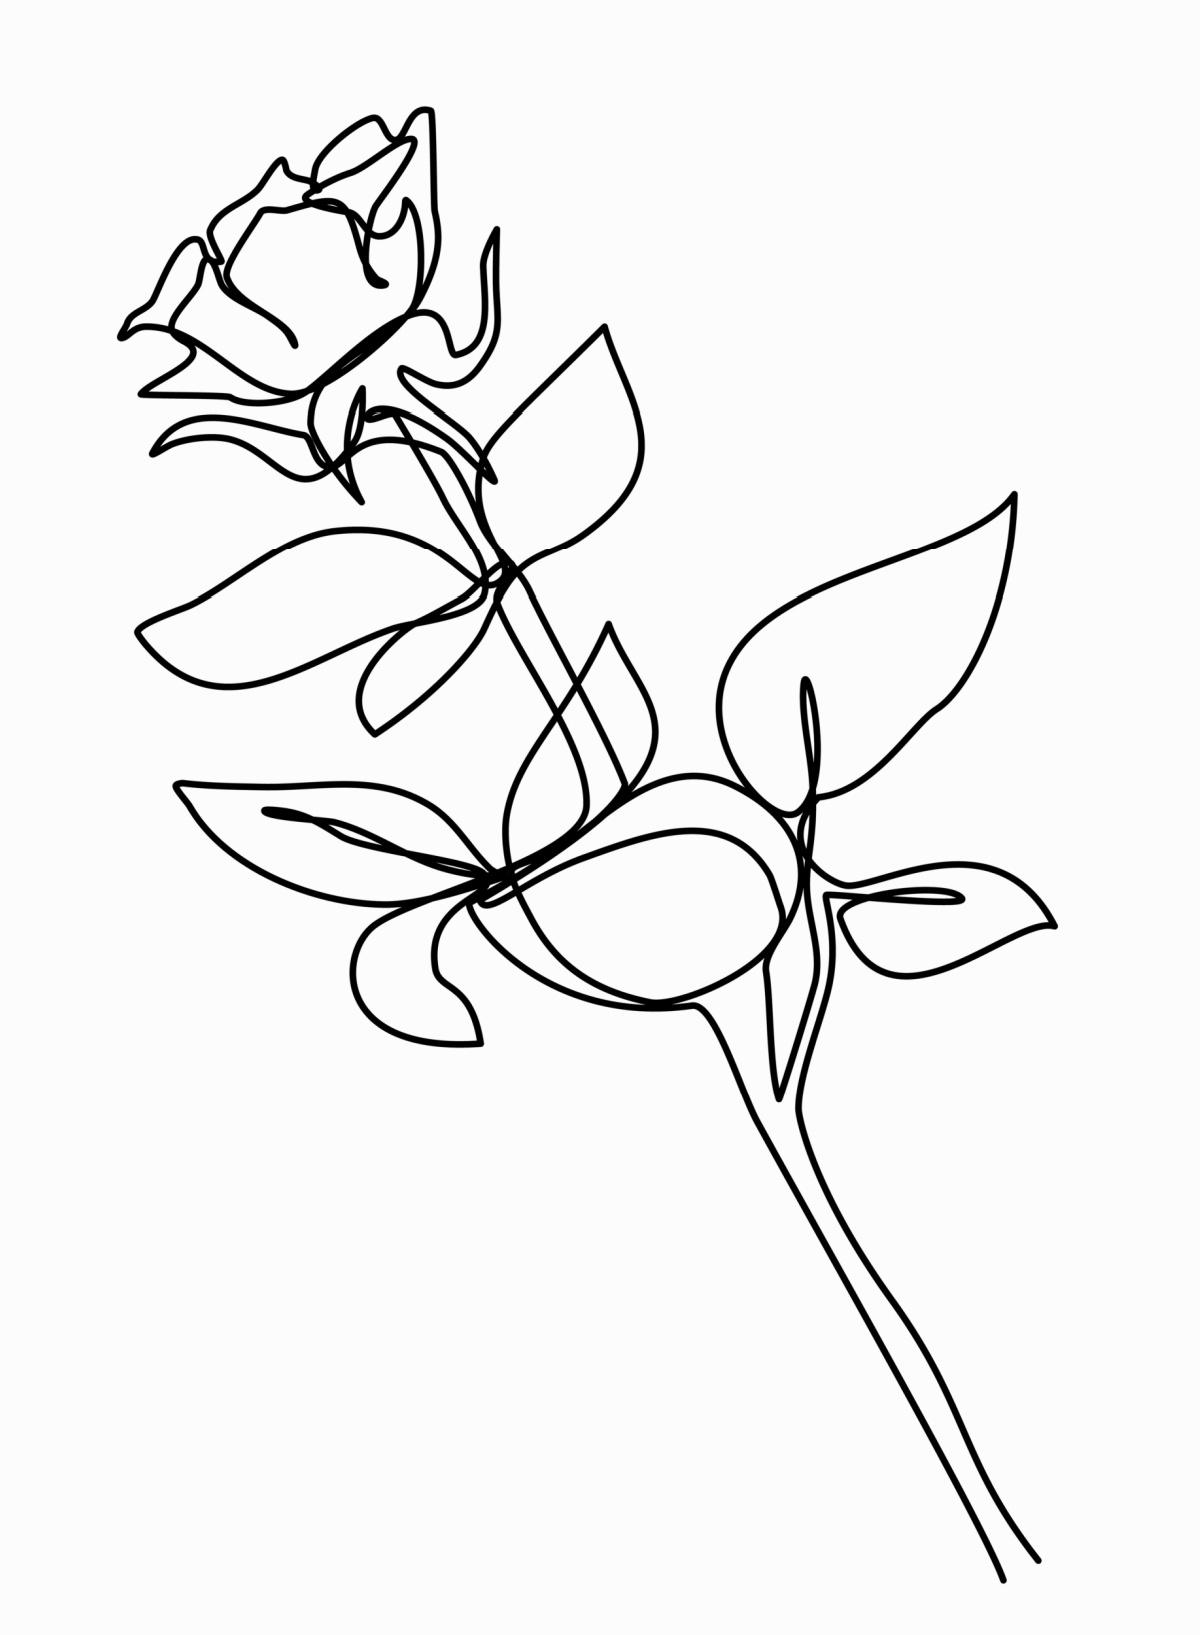 Illustration of a rose bud with leaves.